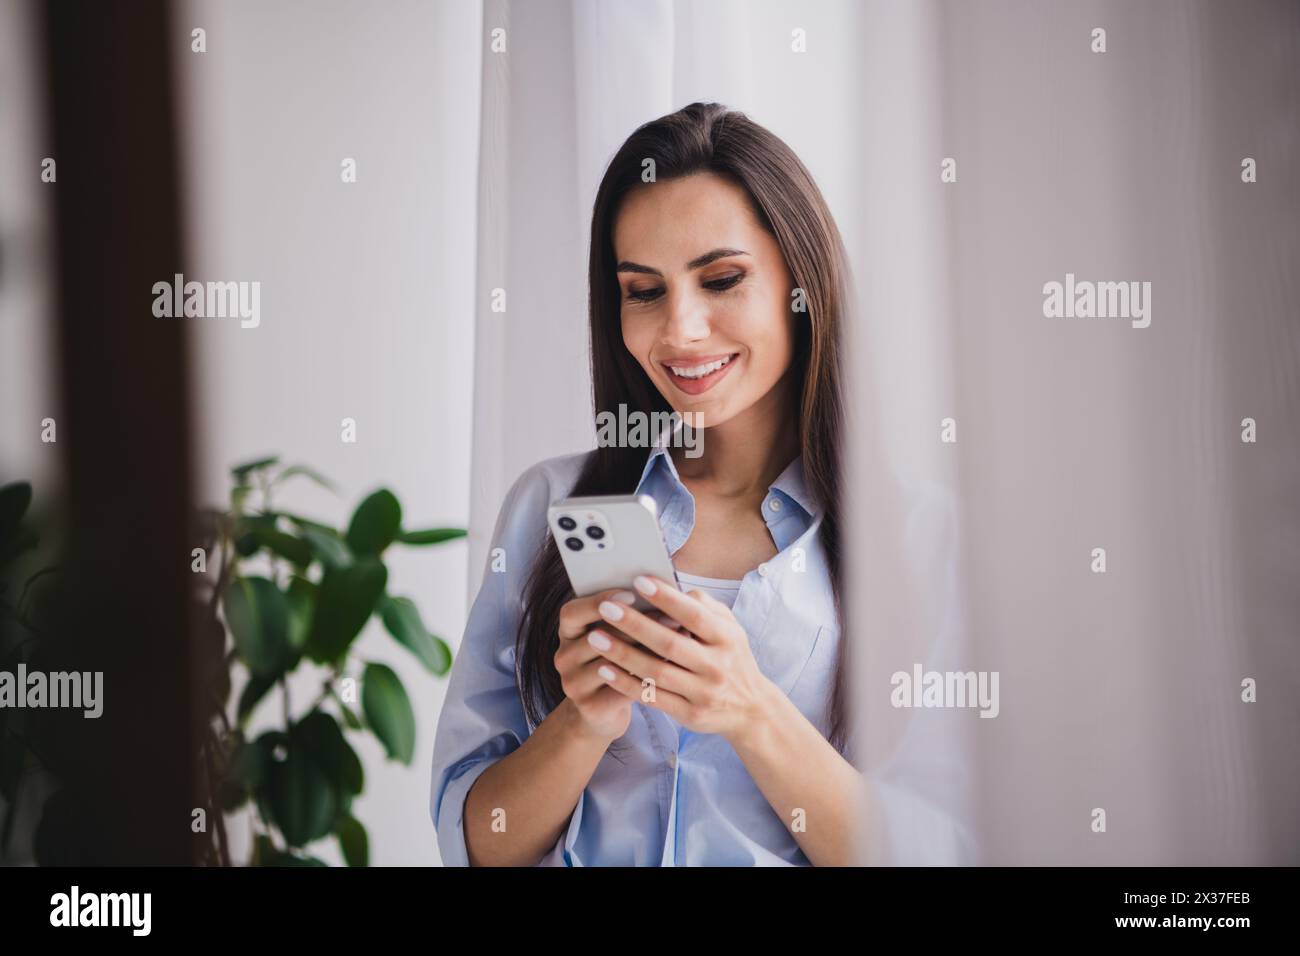 Portrait of pretty lady use smart phone texing wear shirt bright interior apartment indoors Stock Photo